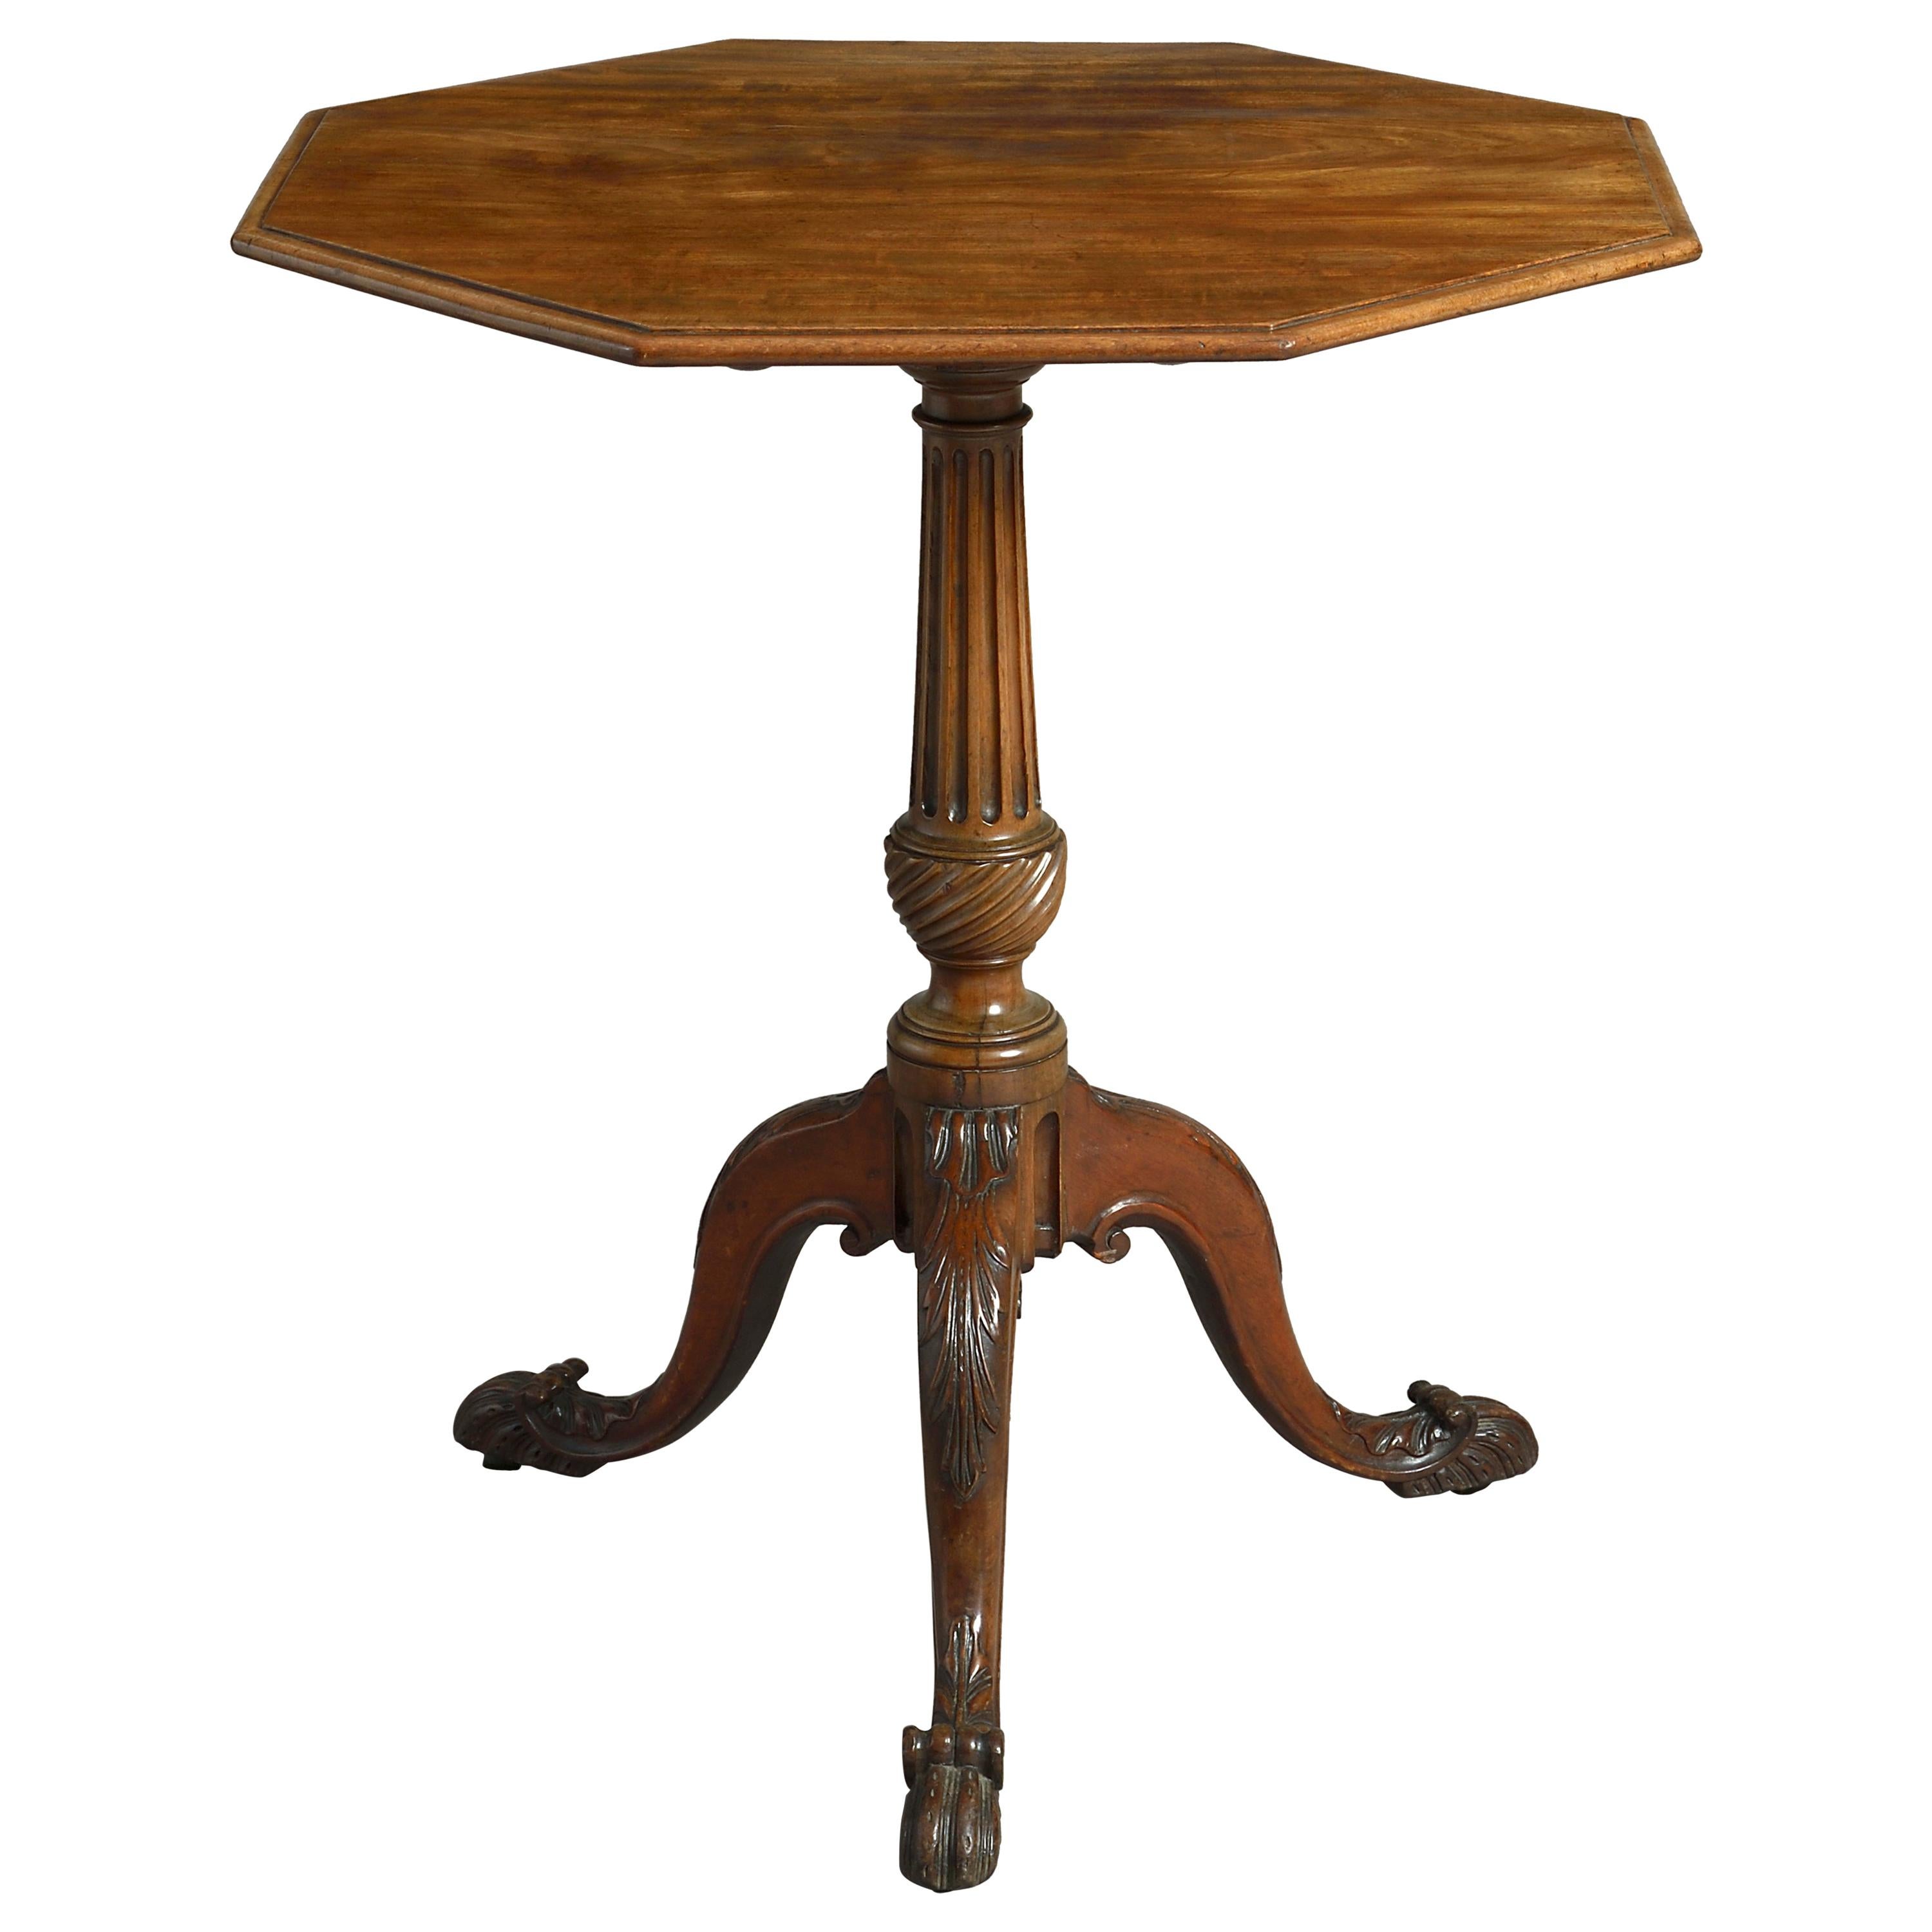 18th Century George III Period Thomas Chippendale Style Mahogany Tripod Table